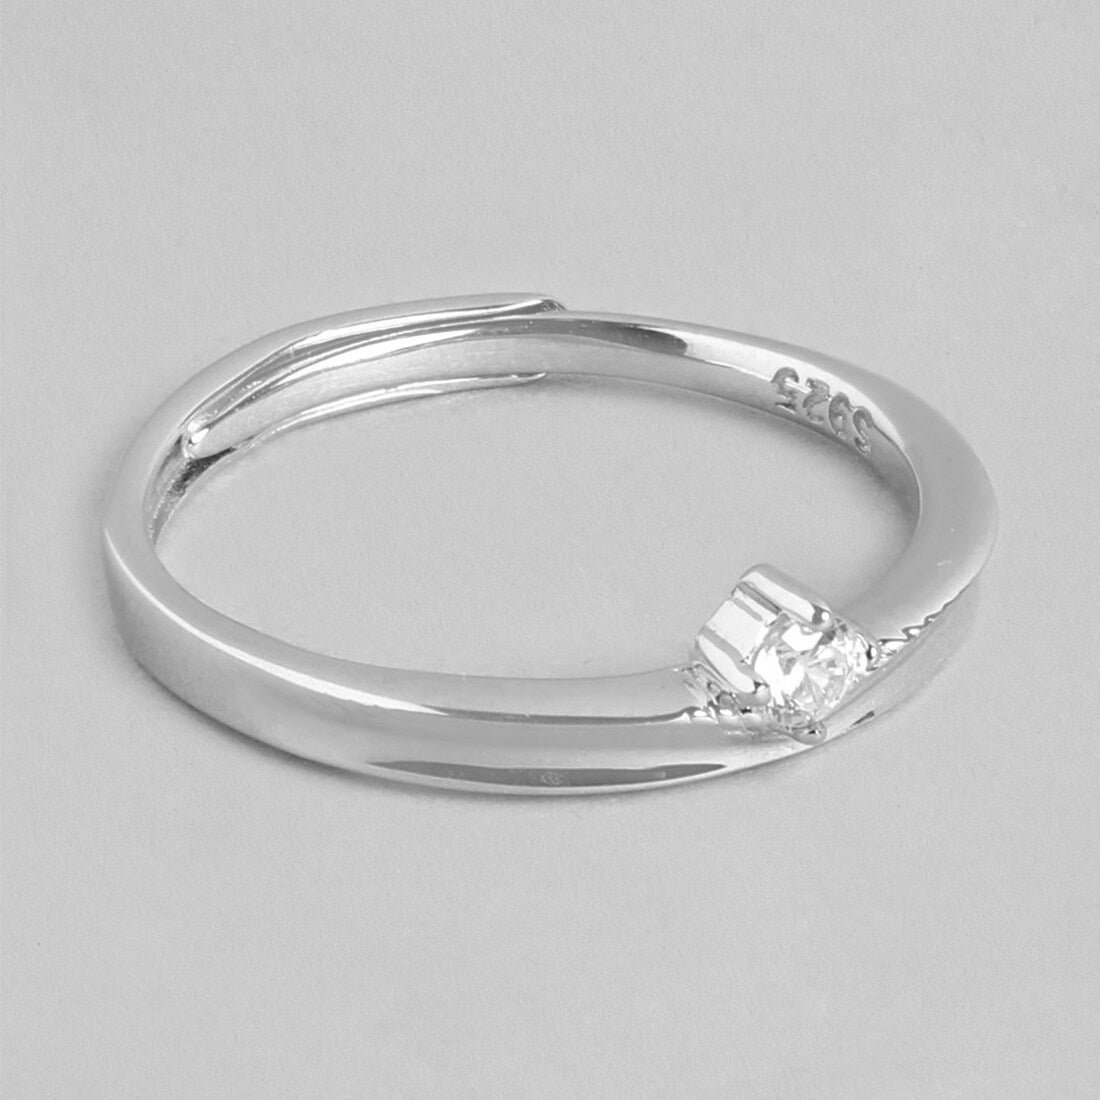 Radiant Simplicity 925 Sterling Silver Female Ring with Cubic Zirconia (Adjustable)